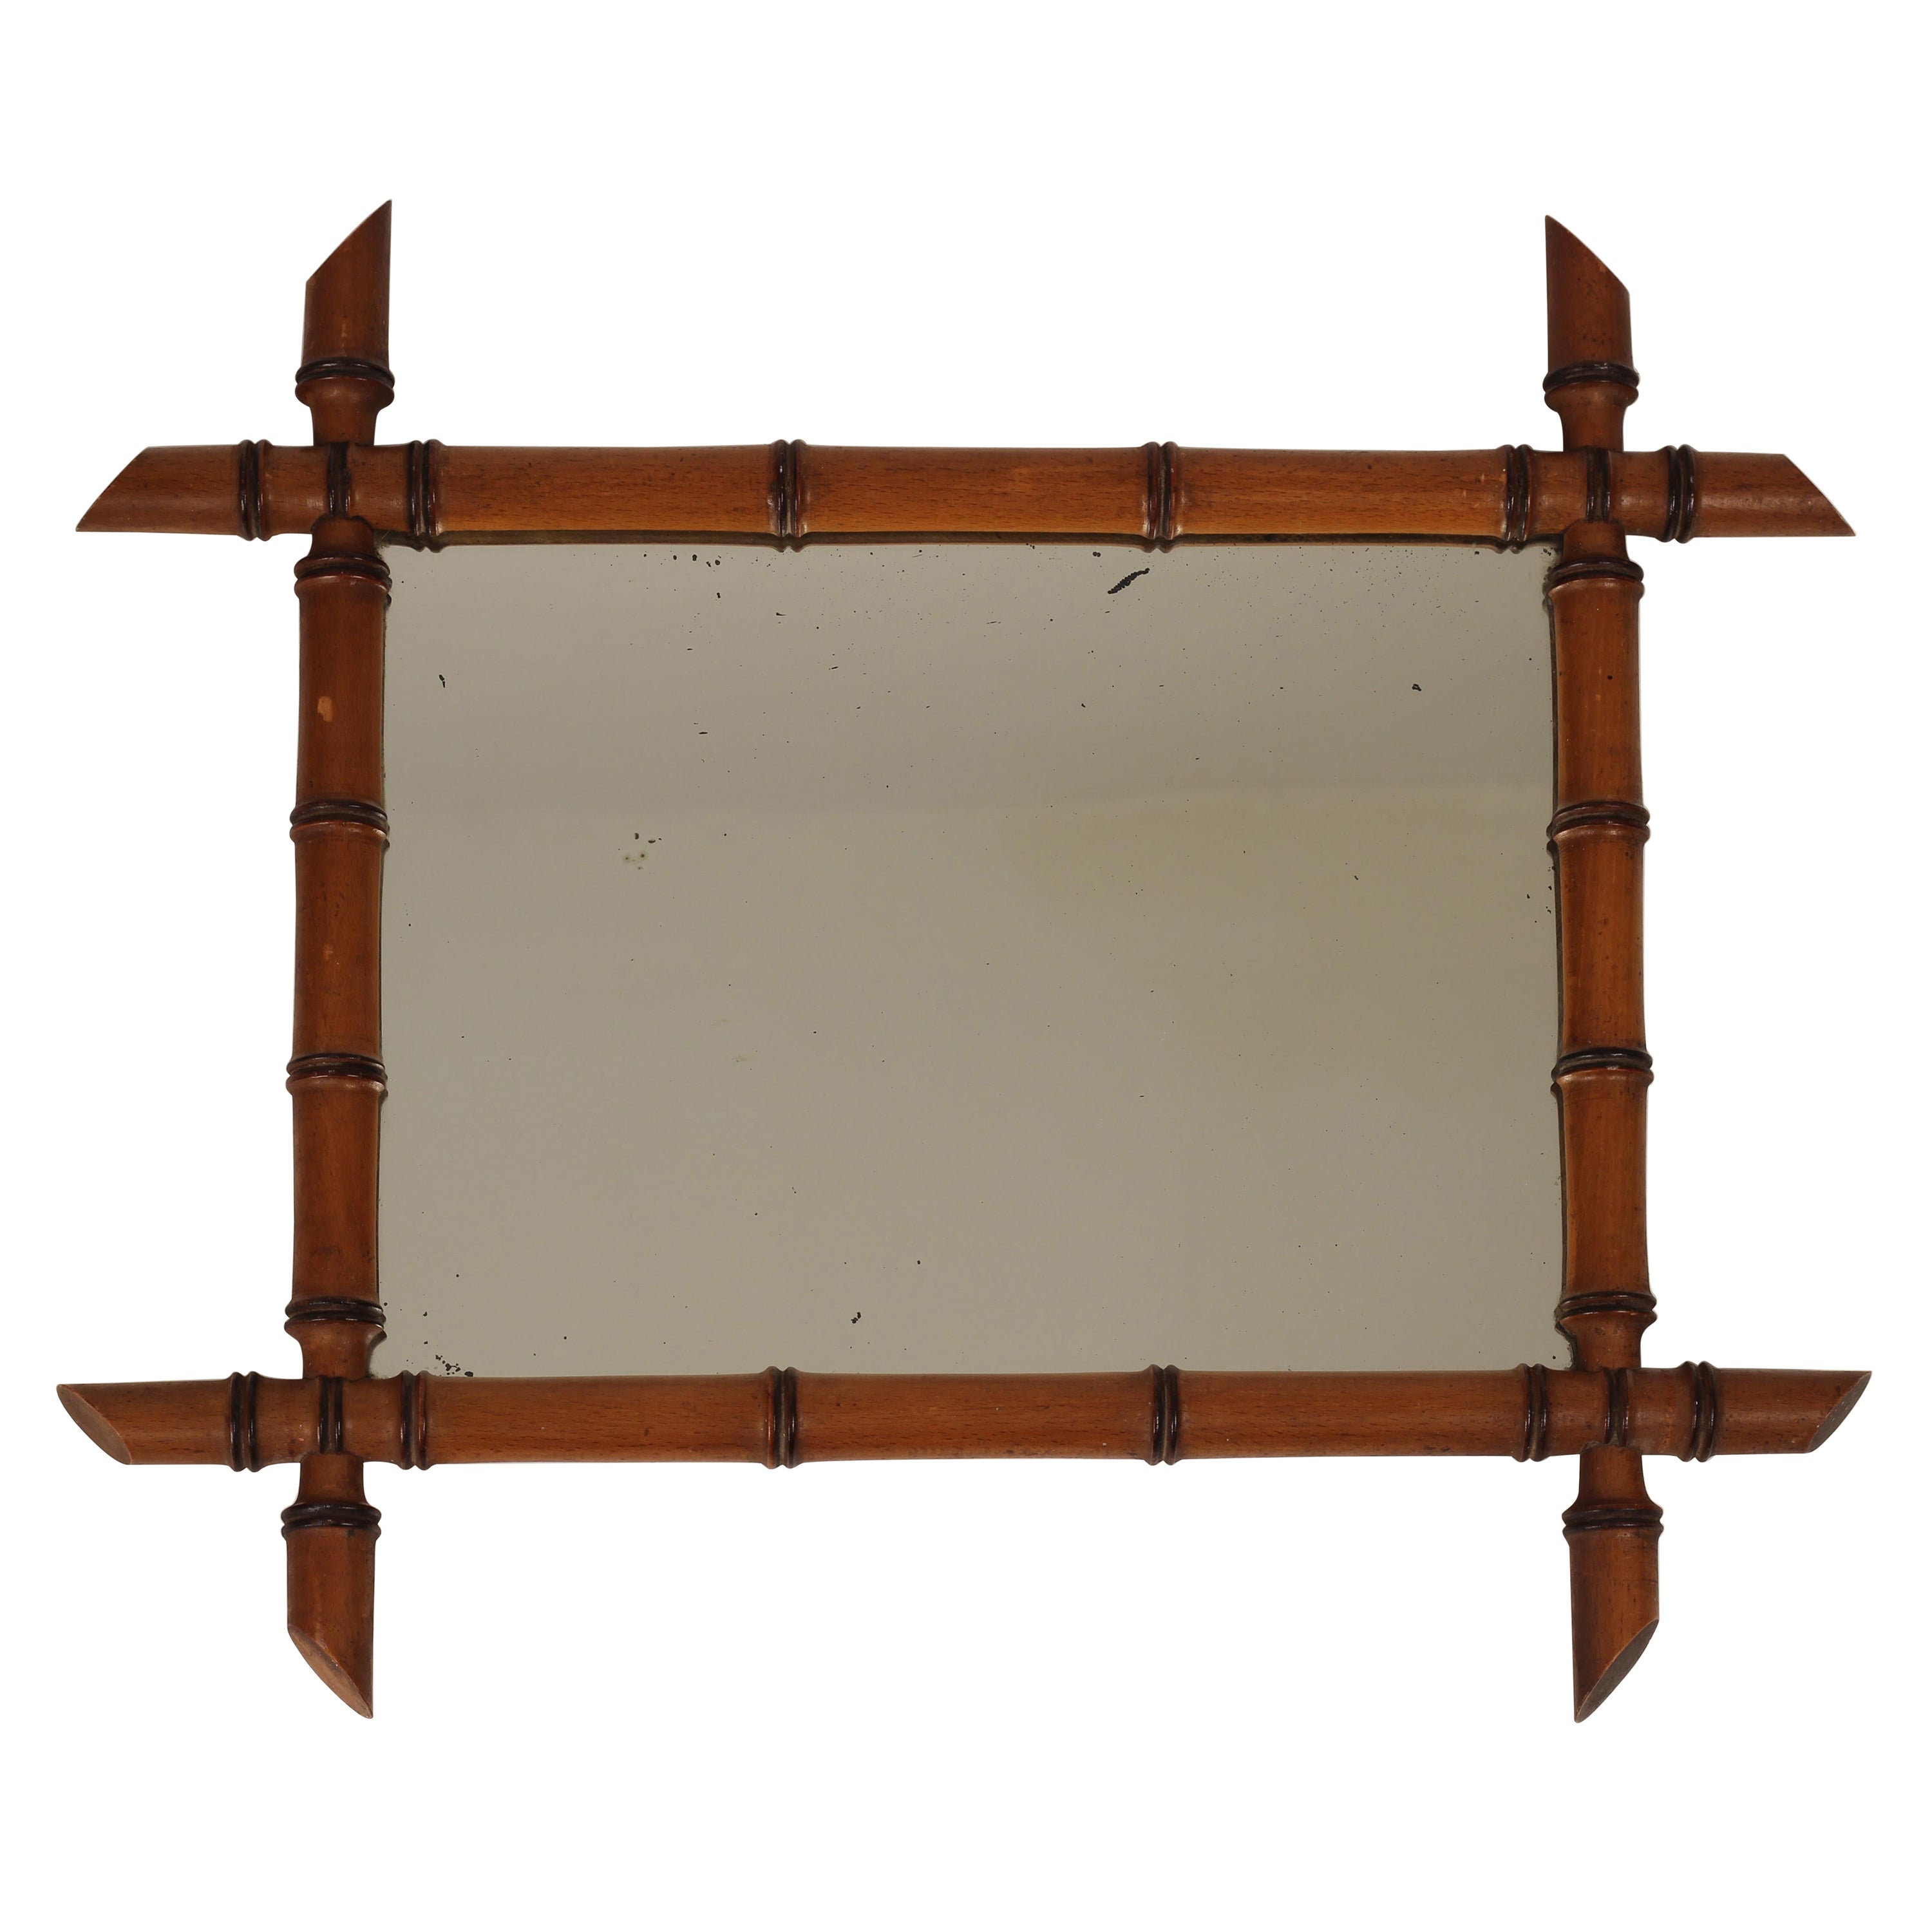 Boho Chic Style Faux Bamboo Walnut Framed Mirror Made in France in mid 1800’s For Sale